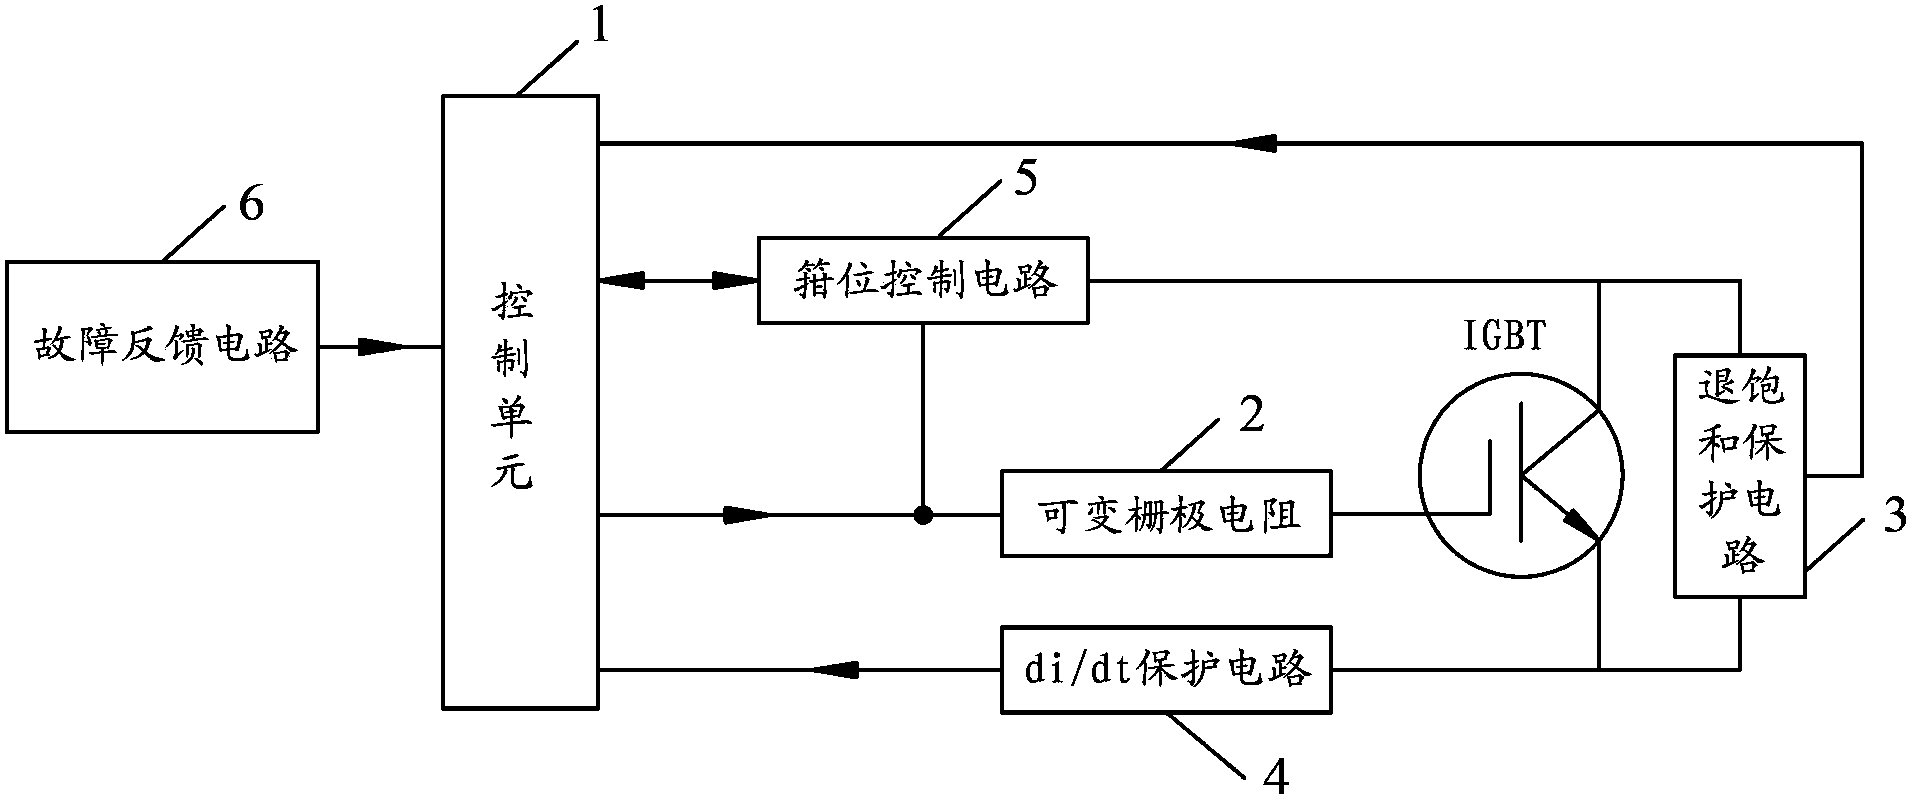 Protective circuit of insulated gate bipolar transistor